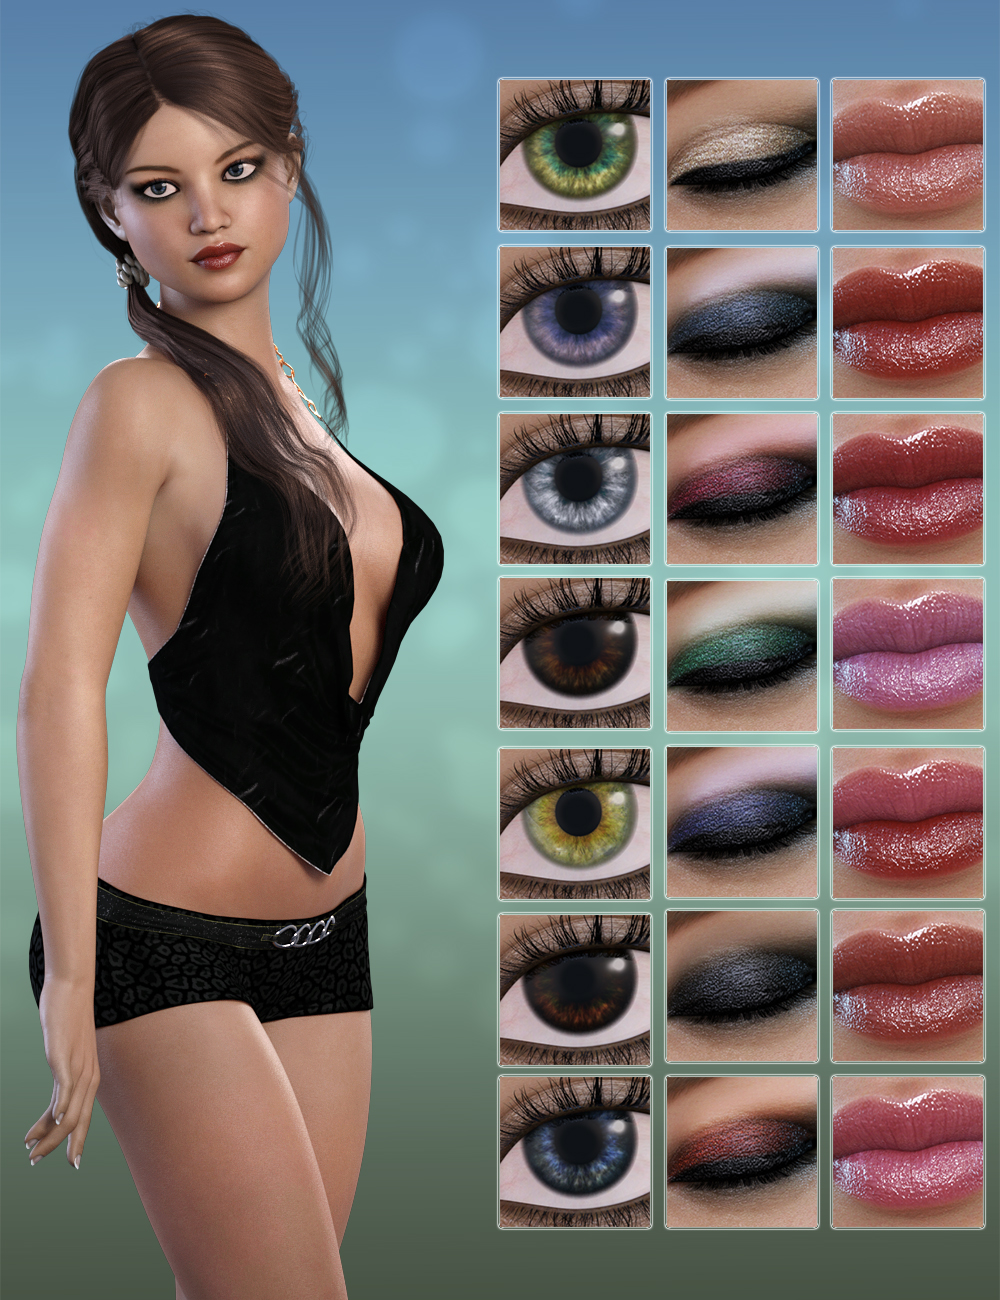 Lauren for Girl 7 by: Sabby3DSublimeProductions, 3D Models by Daz 3D